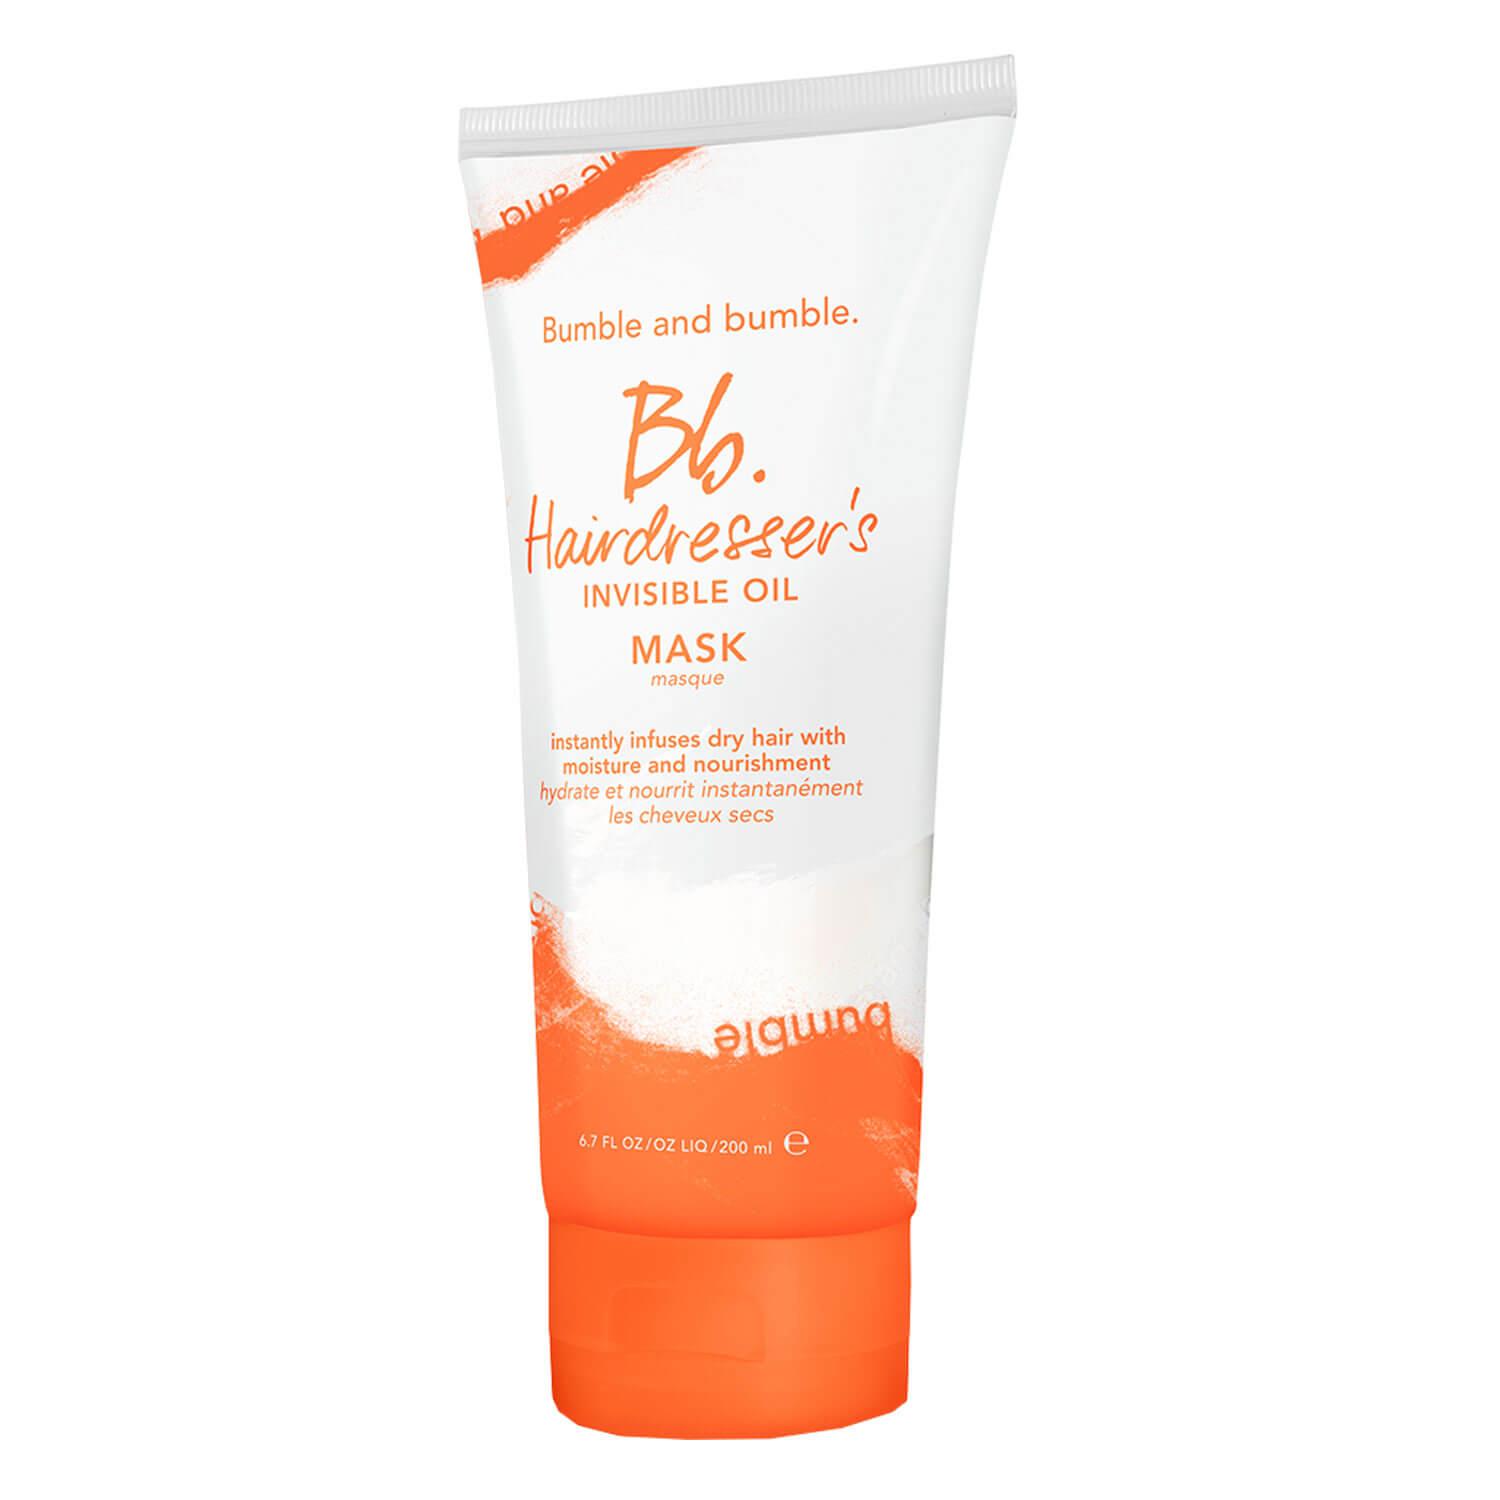 Bb. Hairdresser's Invisible Oil - Hairdresser's Invisible Oil Mask